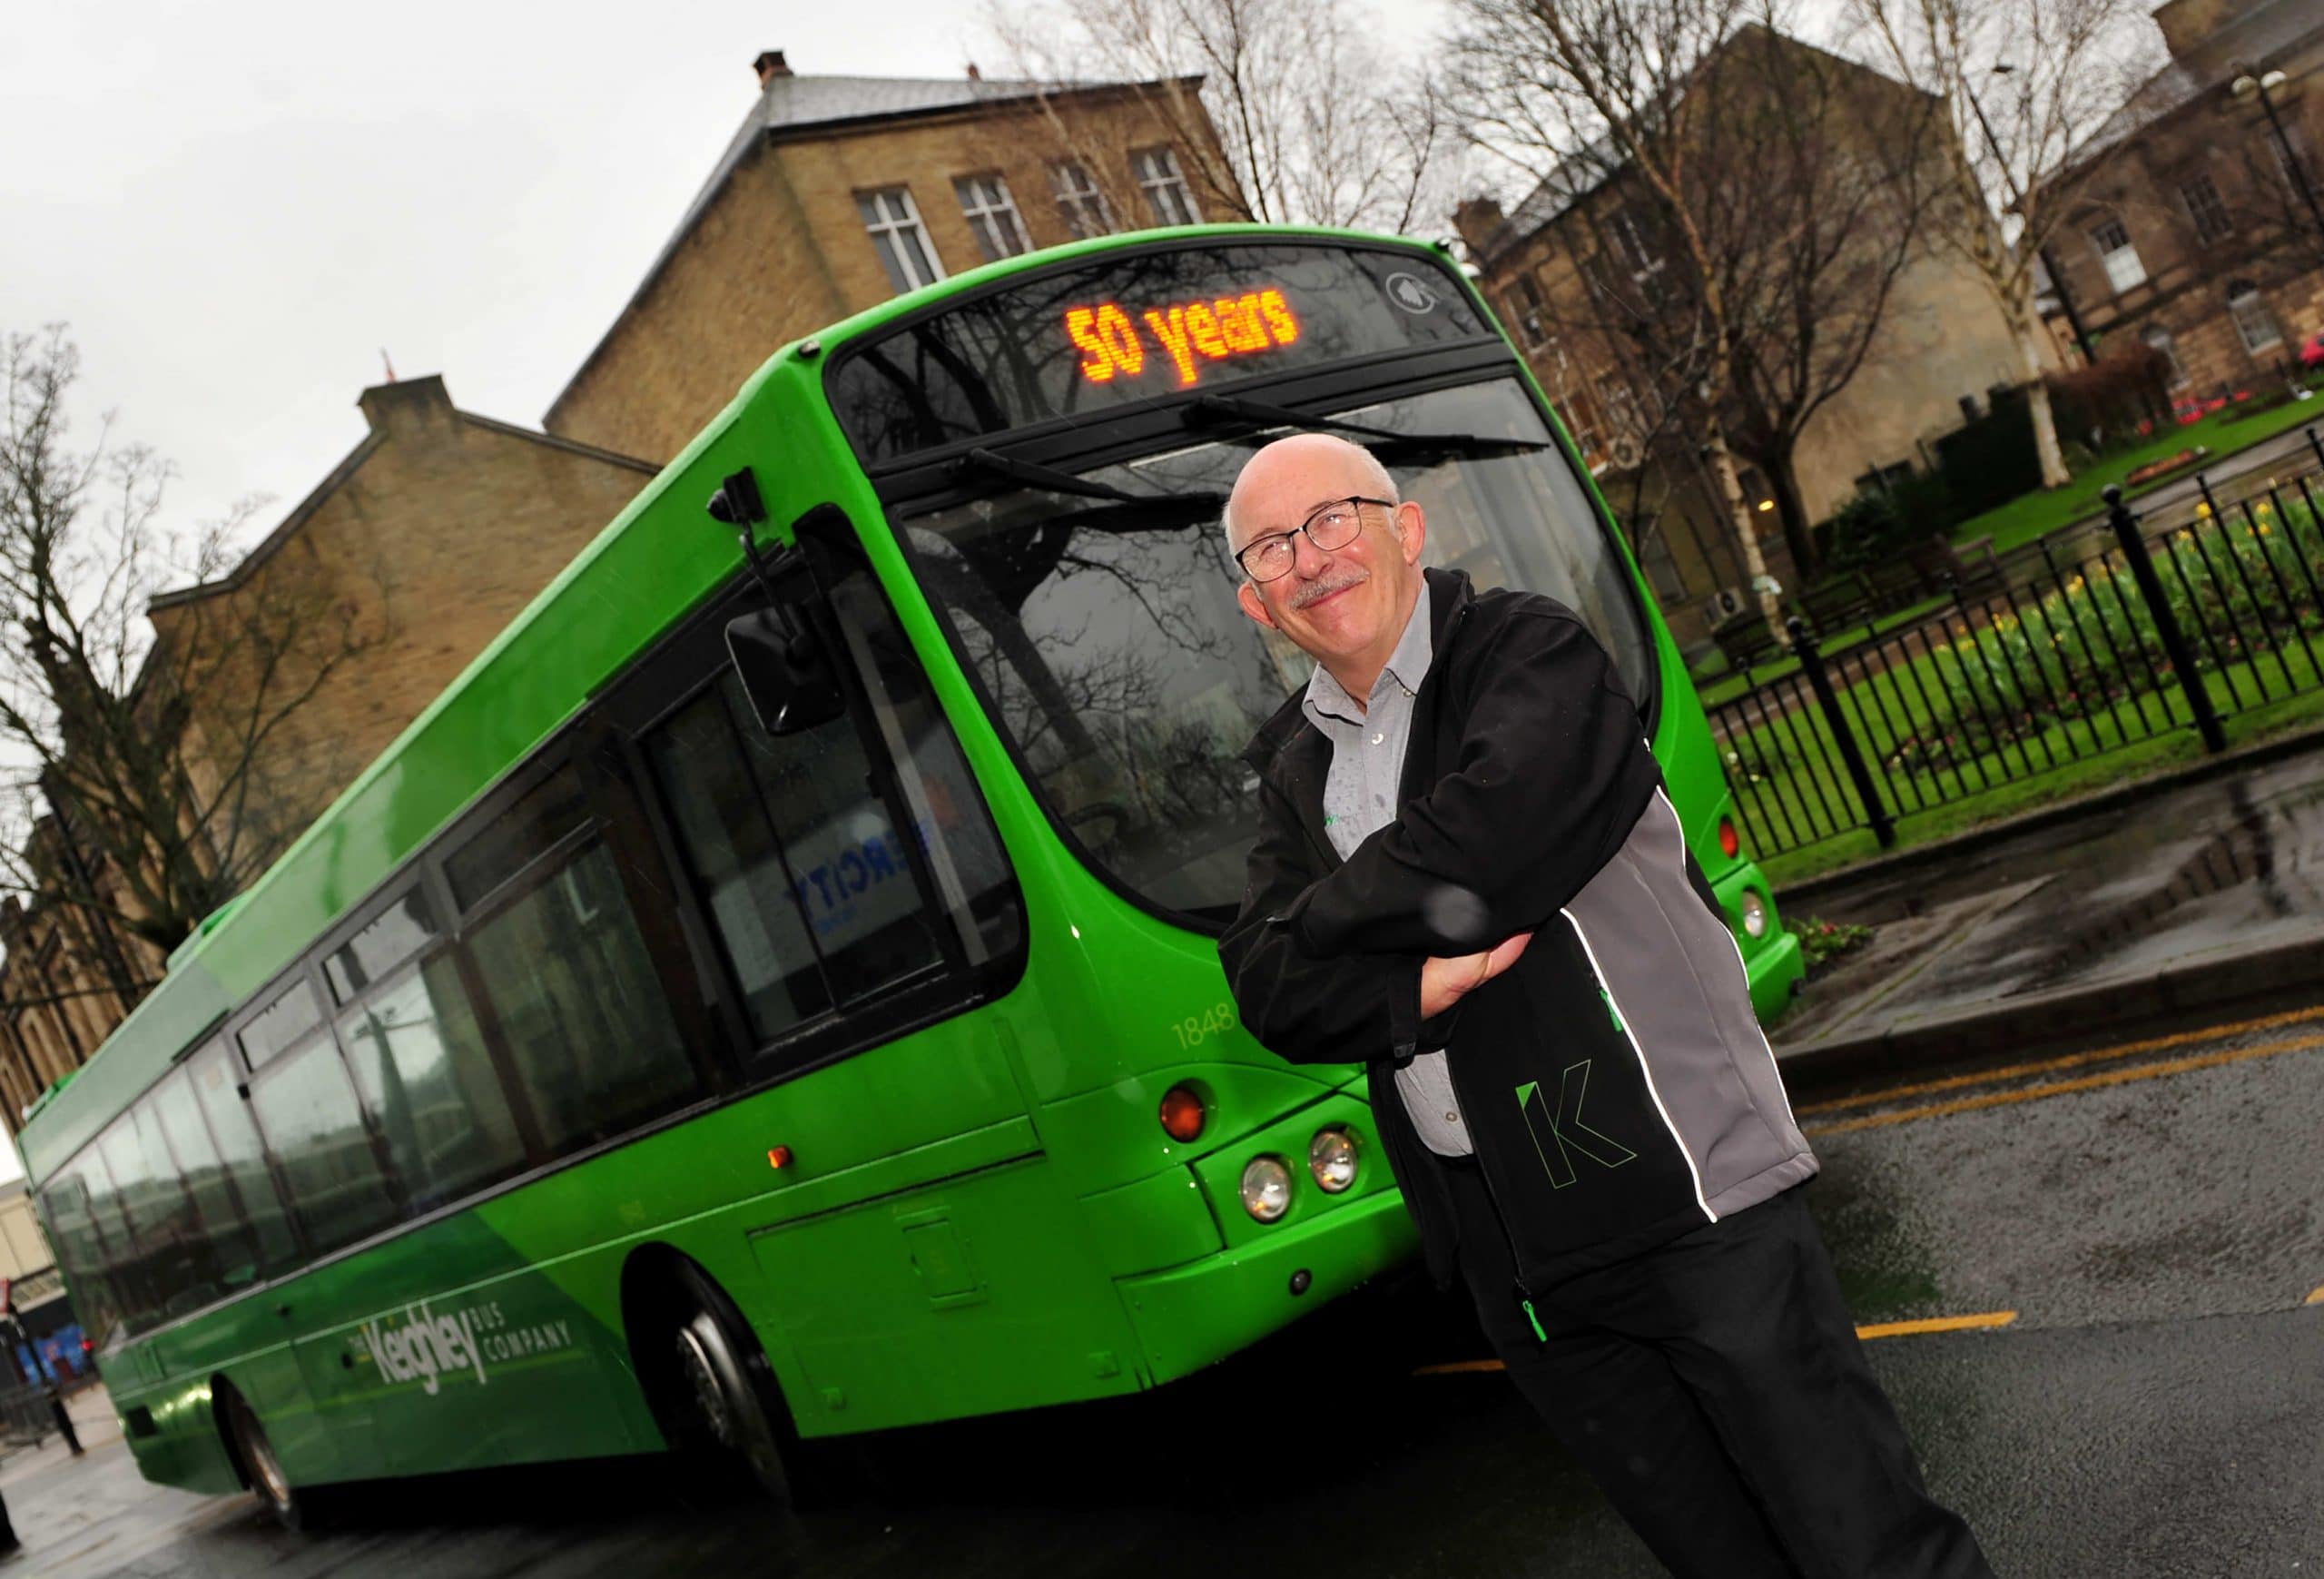 Keighley Bus Company driver John Feather